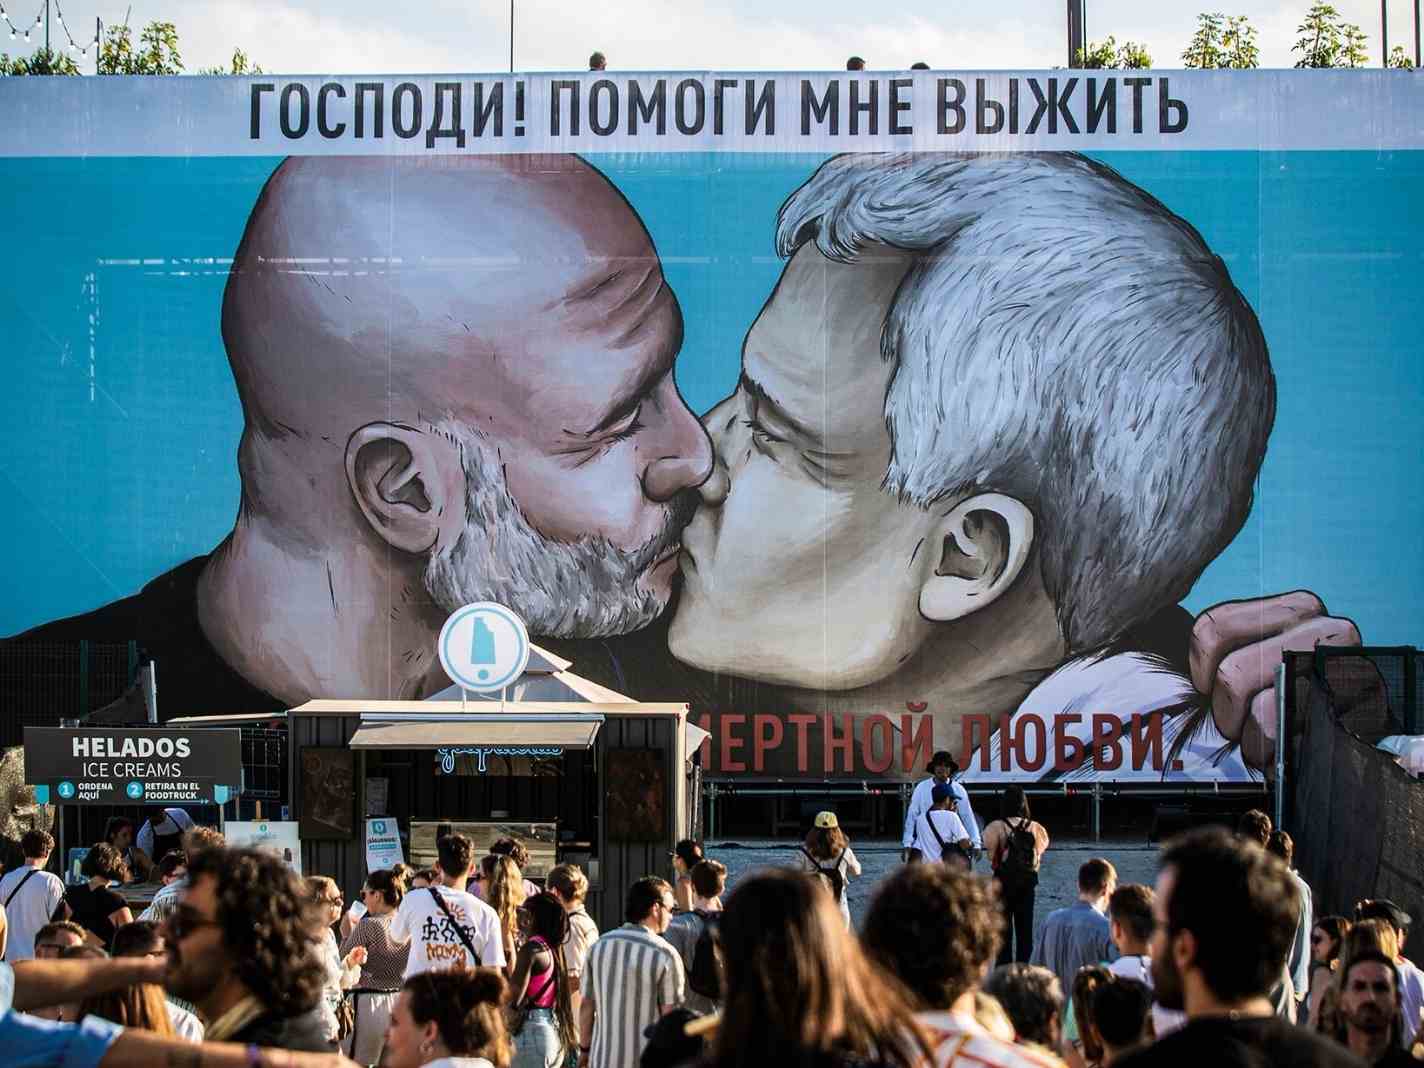 A mural shows Pep Guardiola and Jose Mourinho kissing at the Primavera Sound Festival in Barcelona